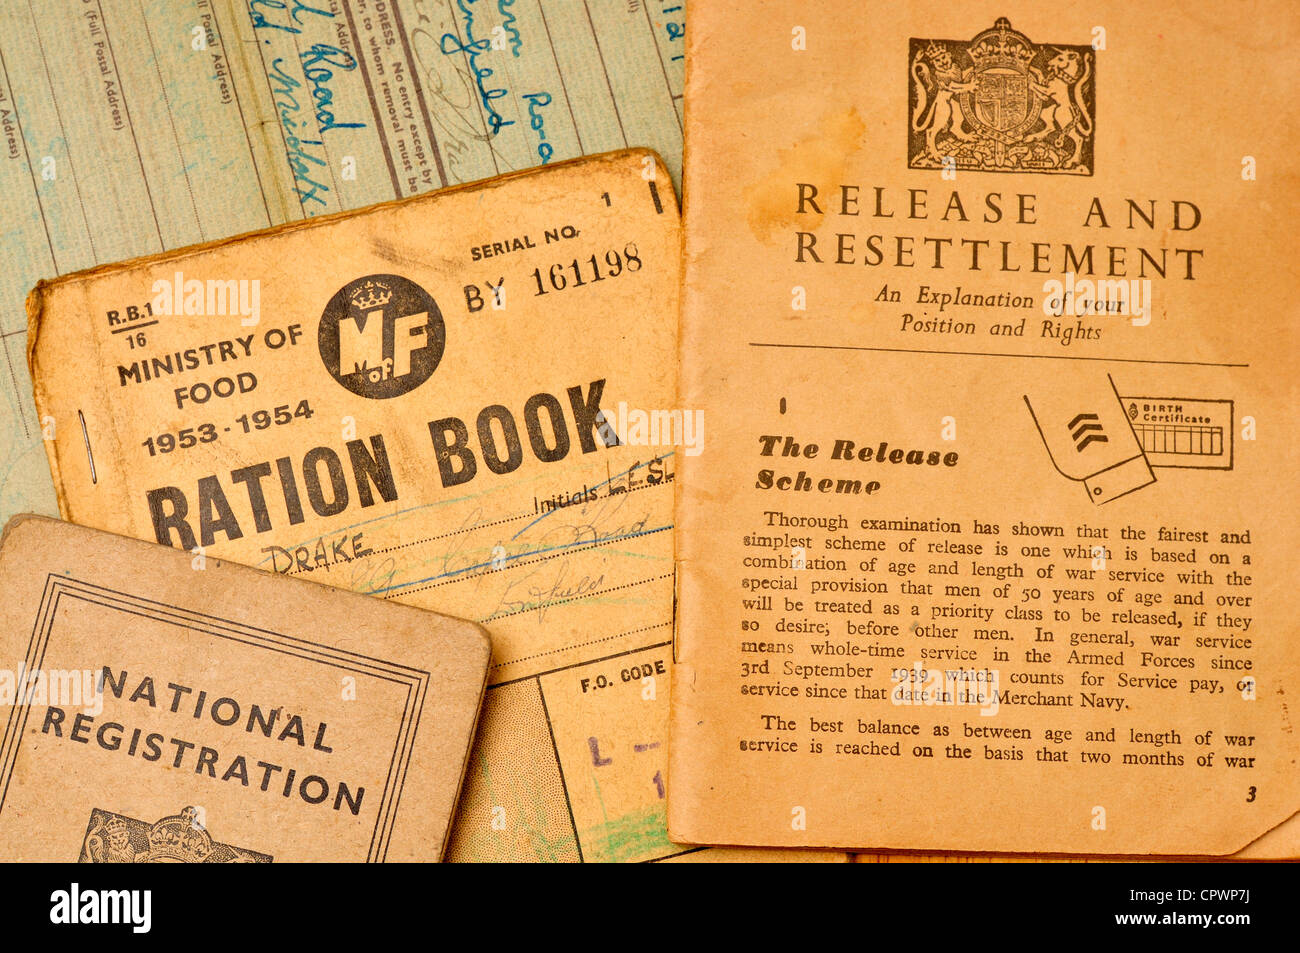 Post World War 2 ration book, identity cards and 'Release and Settlement' advice Stock Photo